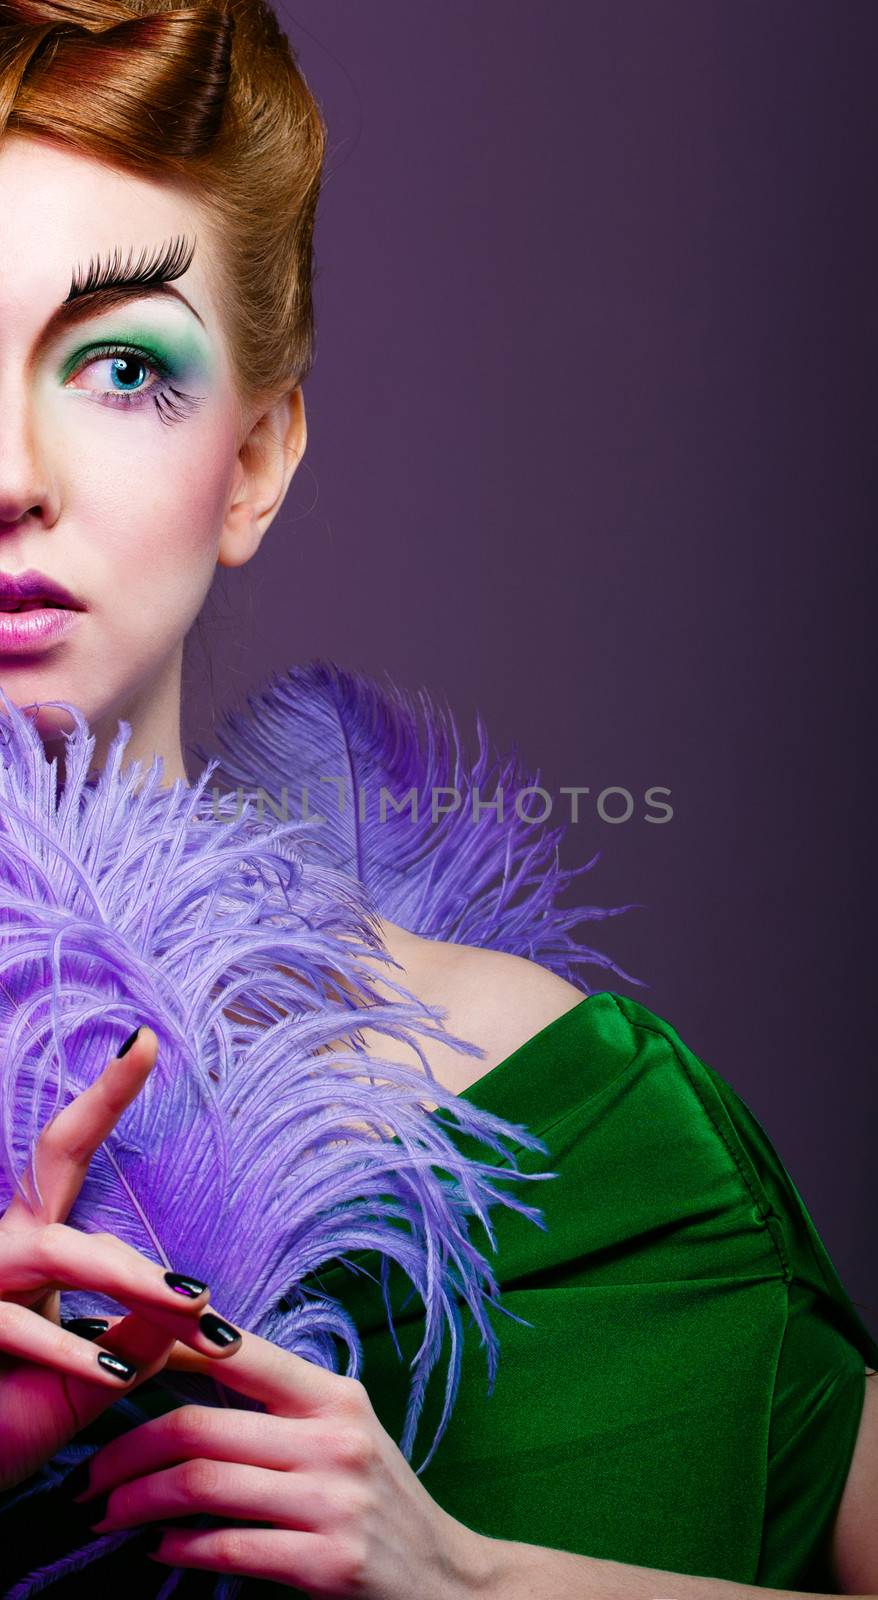 Attractive young girl with a fabulous makeup and feathers close-up portrait